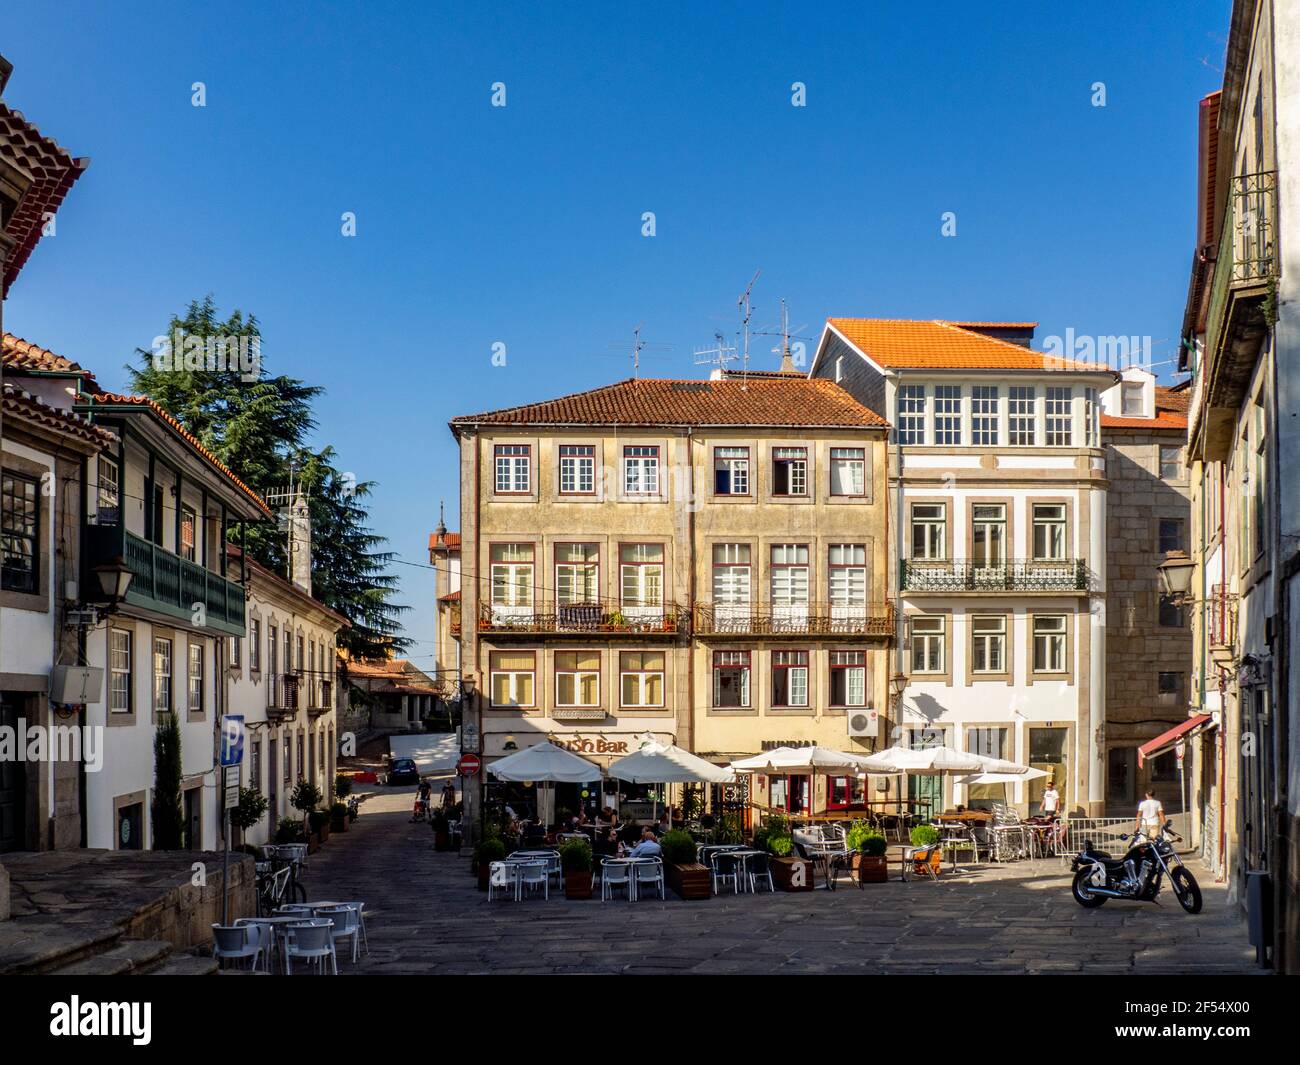 Viseu, Portugal; August 2020: view of one of the squares of the historic city of Viseu, Portugal Stock Photo